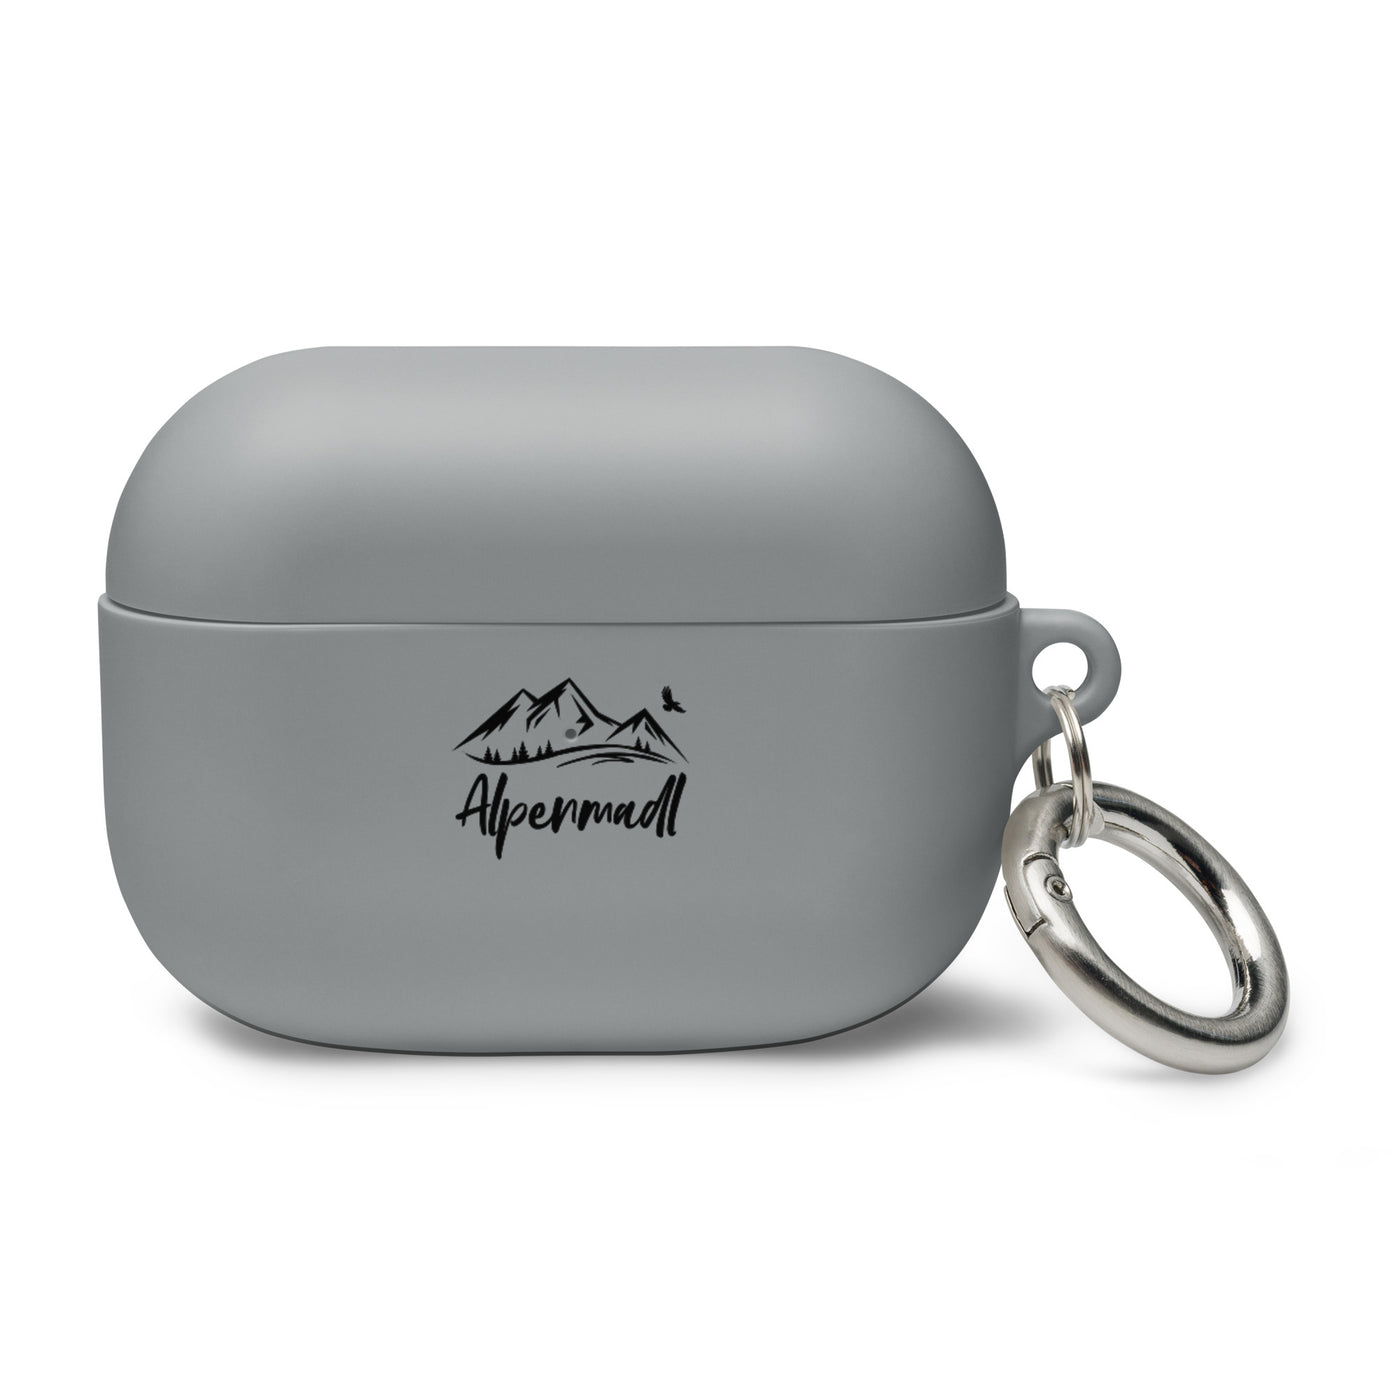 Alpenmadl - AirPods Case berge Grey AirPods Pro